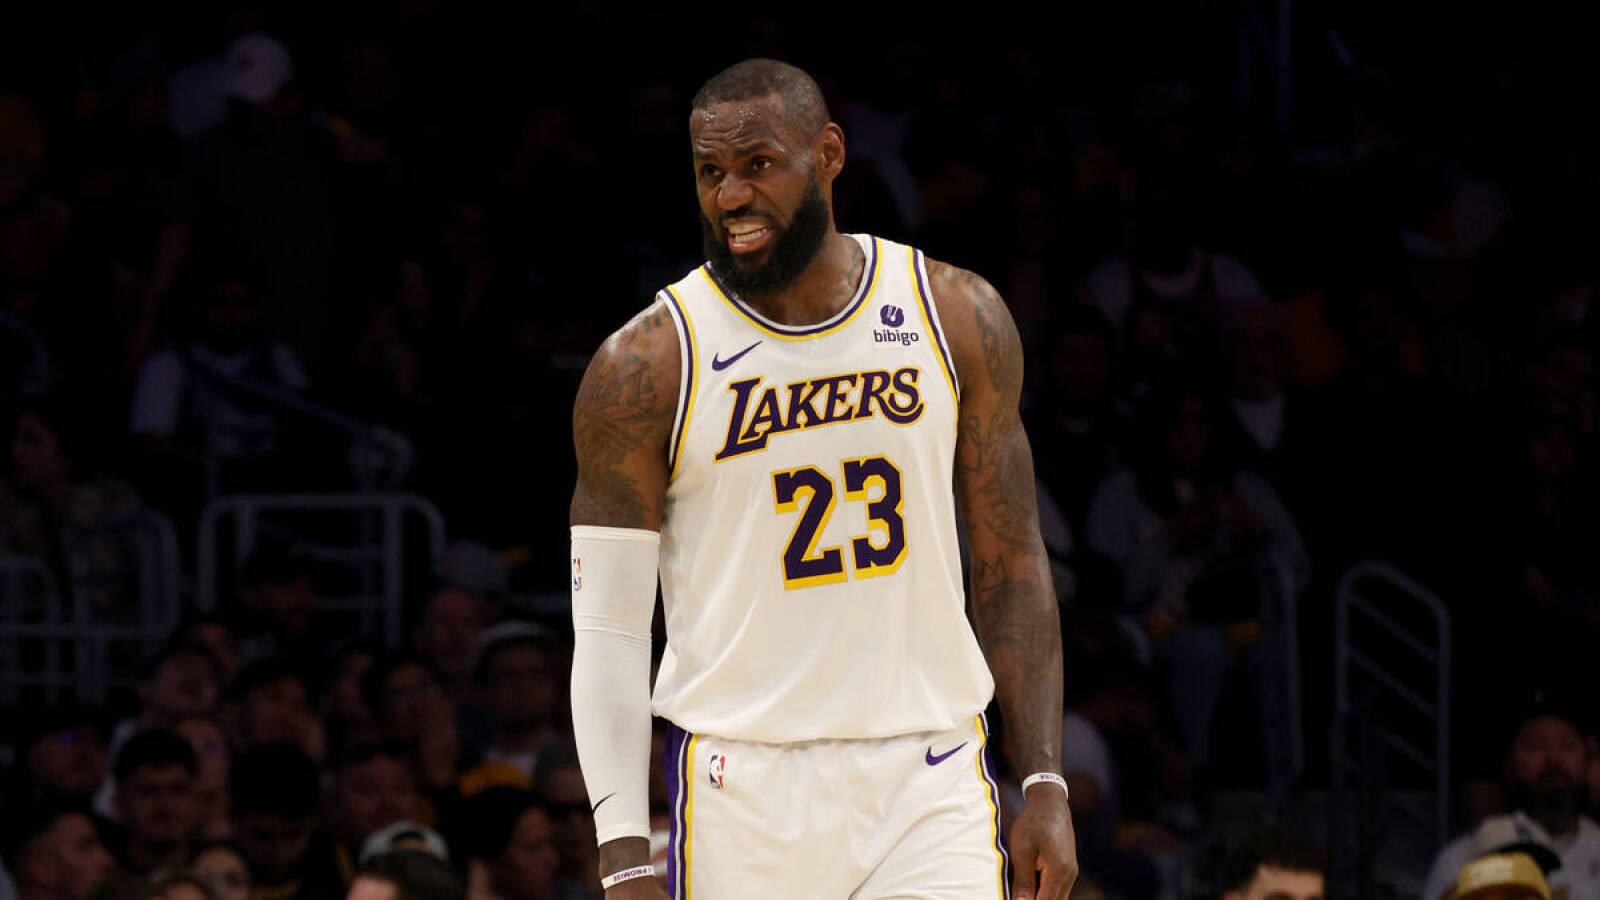 Watch: LeBron James is furious after Lakers bench doesn't challenge call